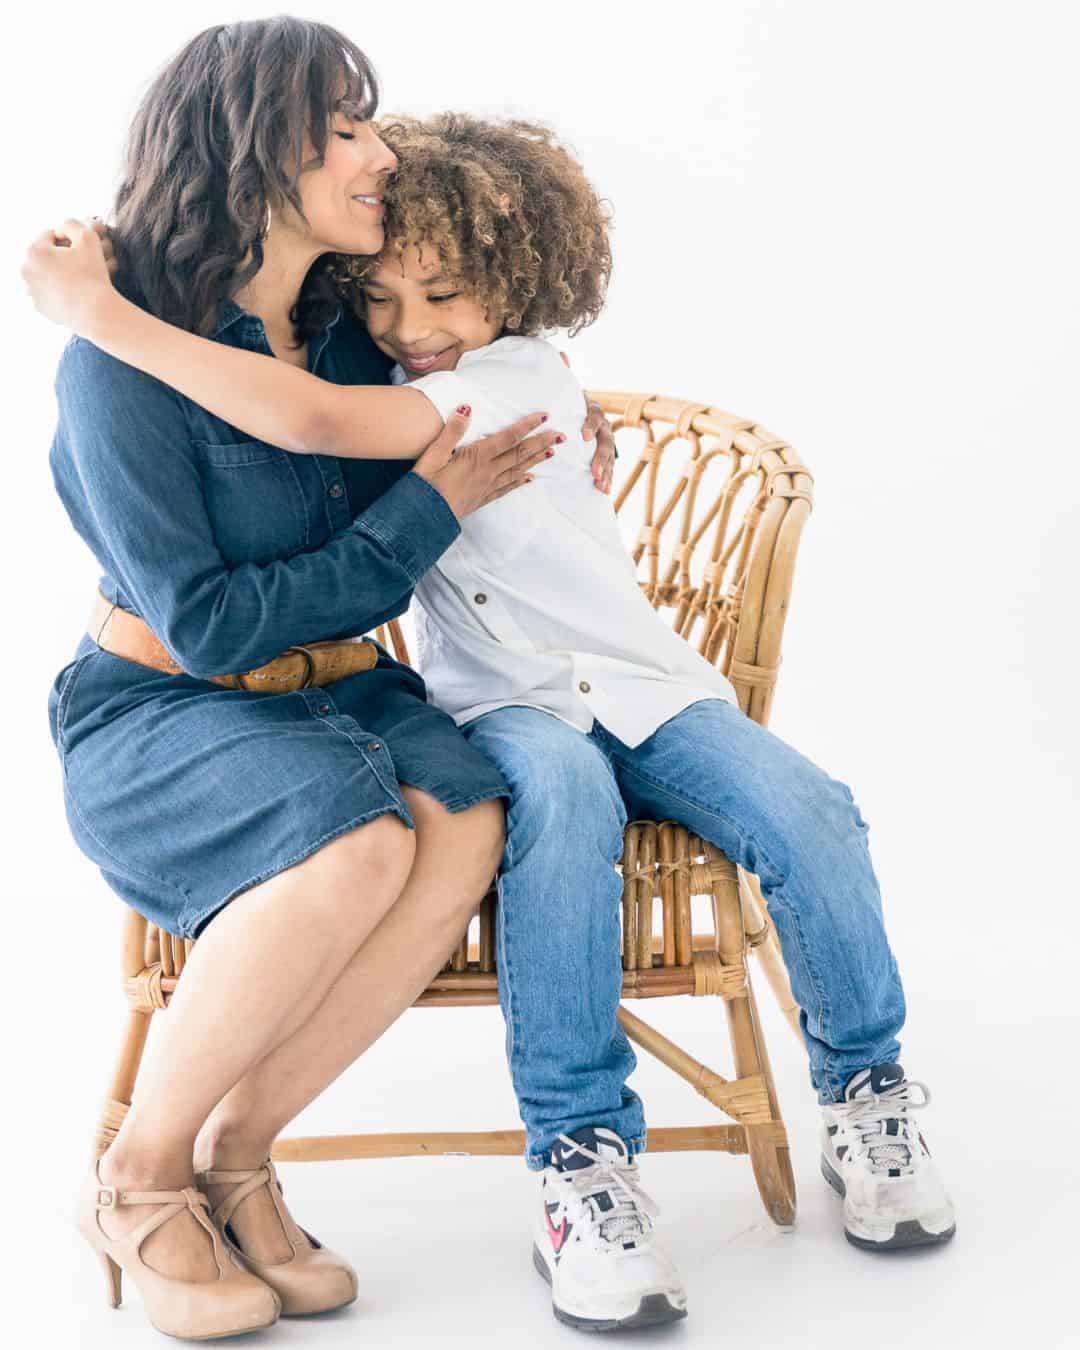 A photo of a mom in a denim dress hugging her son.